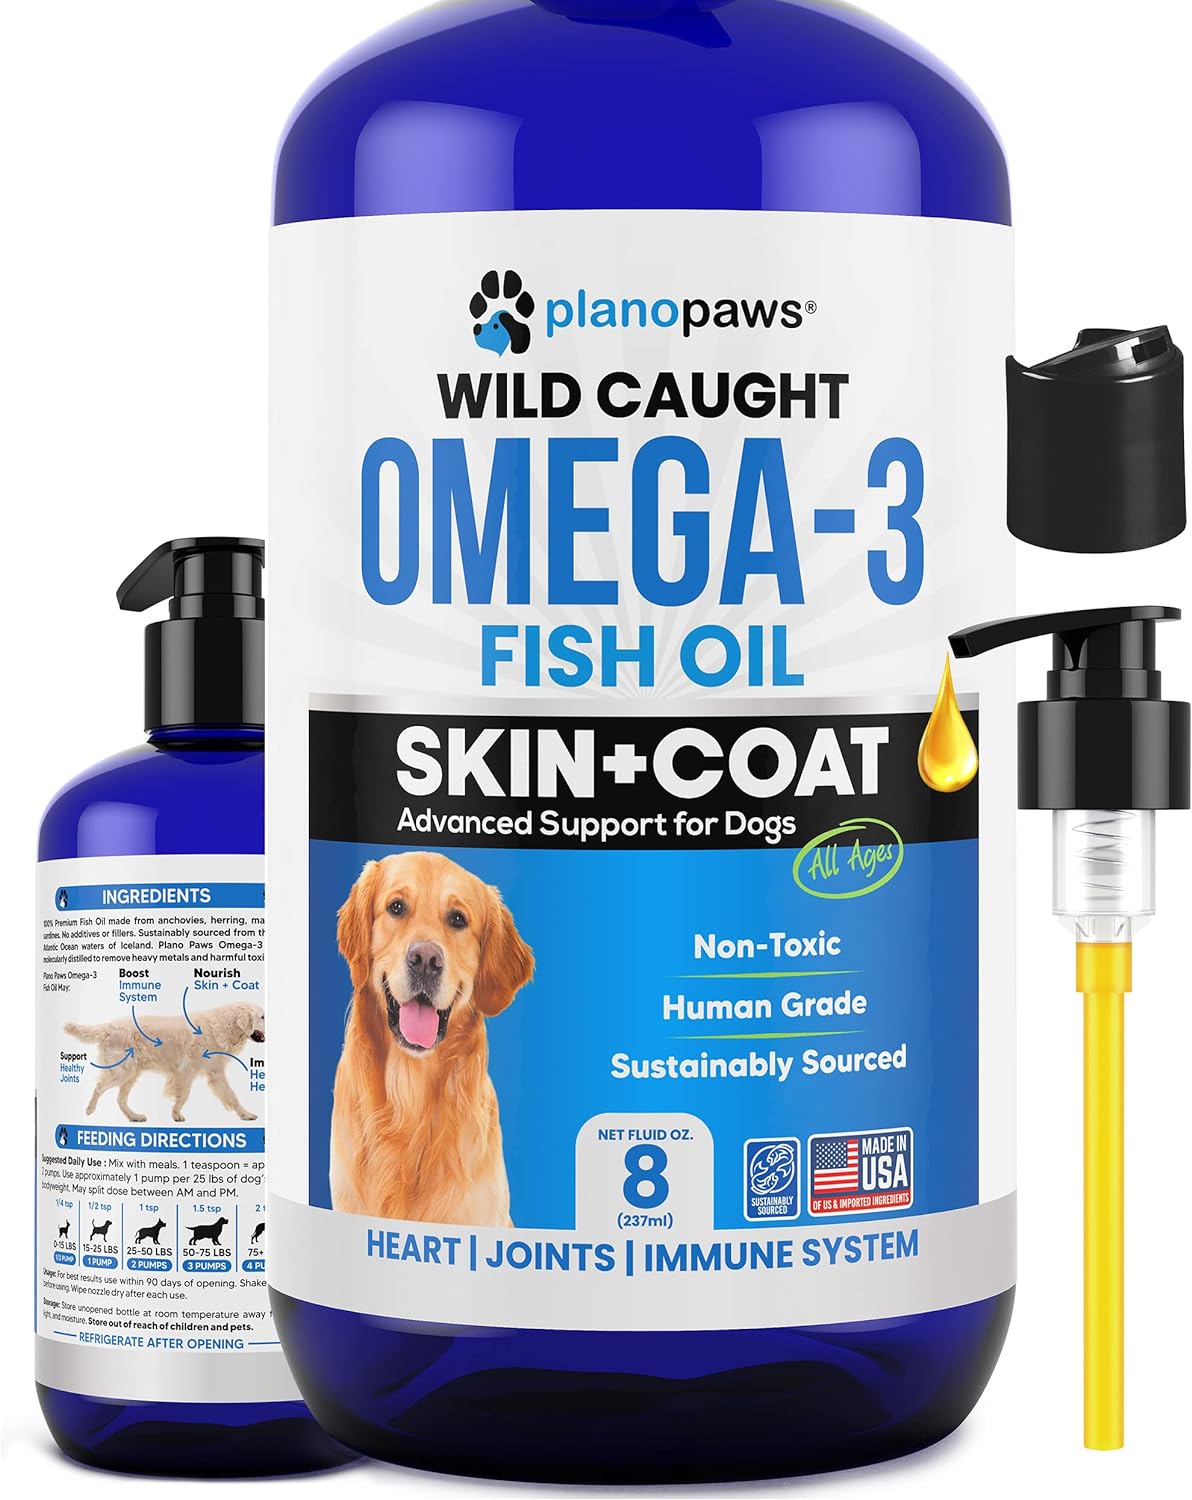 Omega 3 Fish Oil for Dogs - Better Than Salmon Oil for Dogs - Dog Fish Oil Supplement for Shedding, Allergy, Itch Relief - Supports Dry Skin, Joints - Dog Skin and Coat Supplement - Fish Oil Liquid